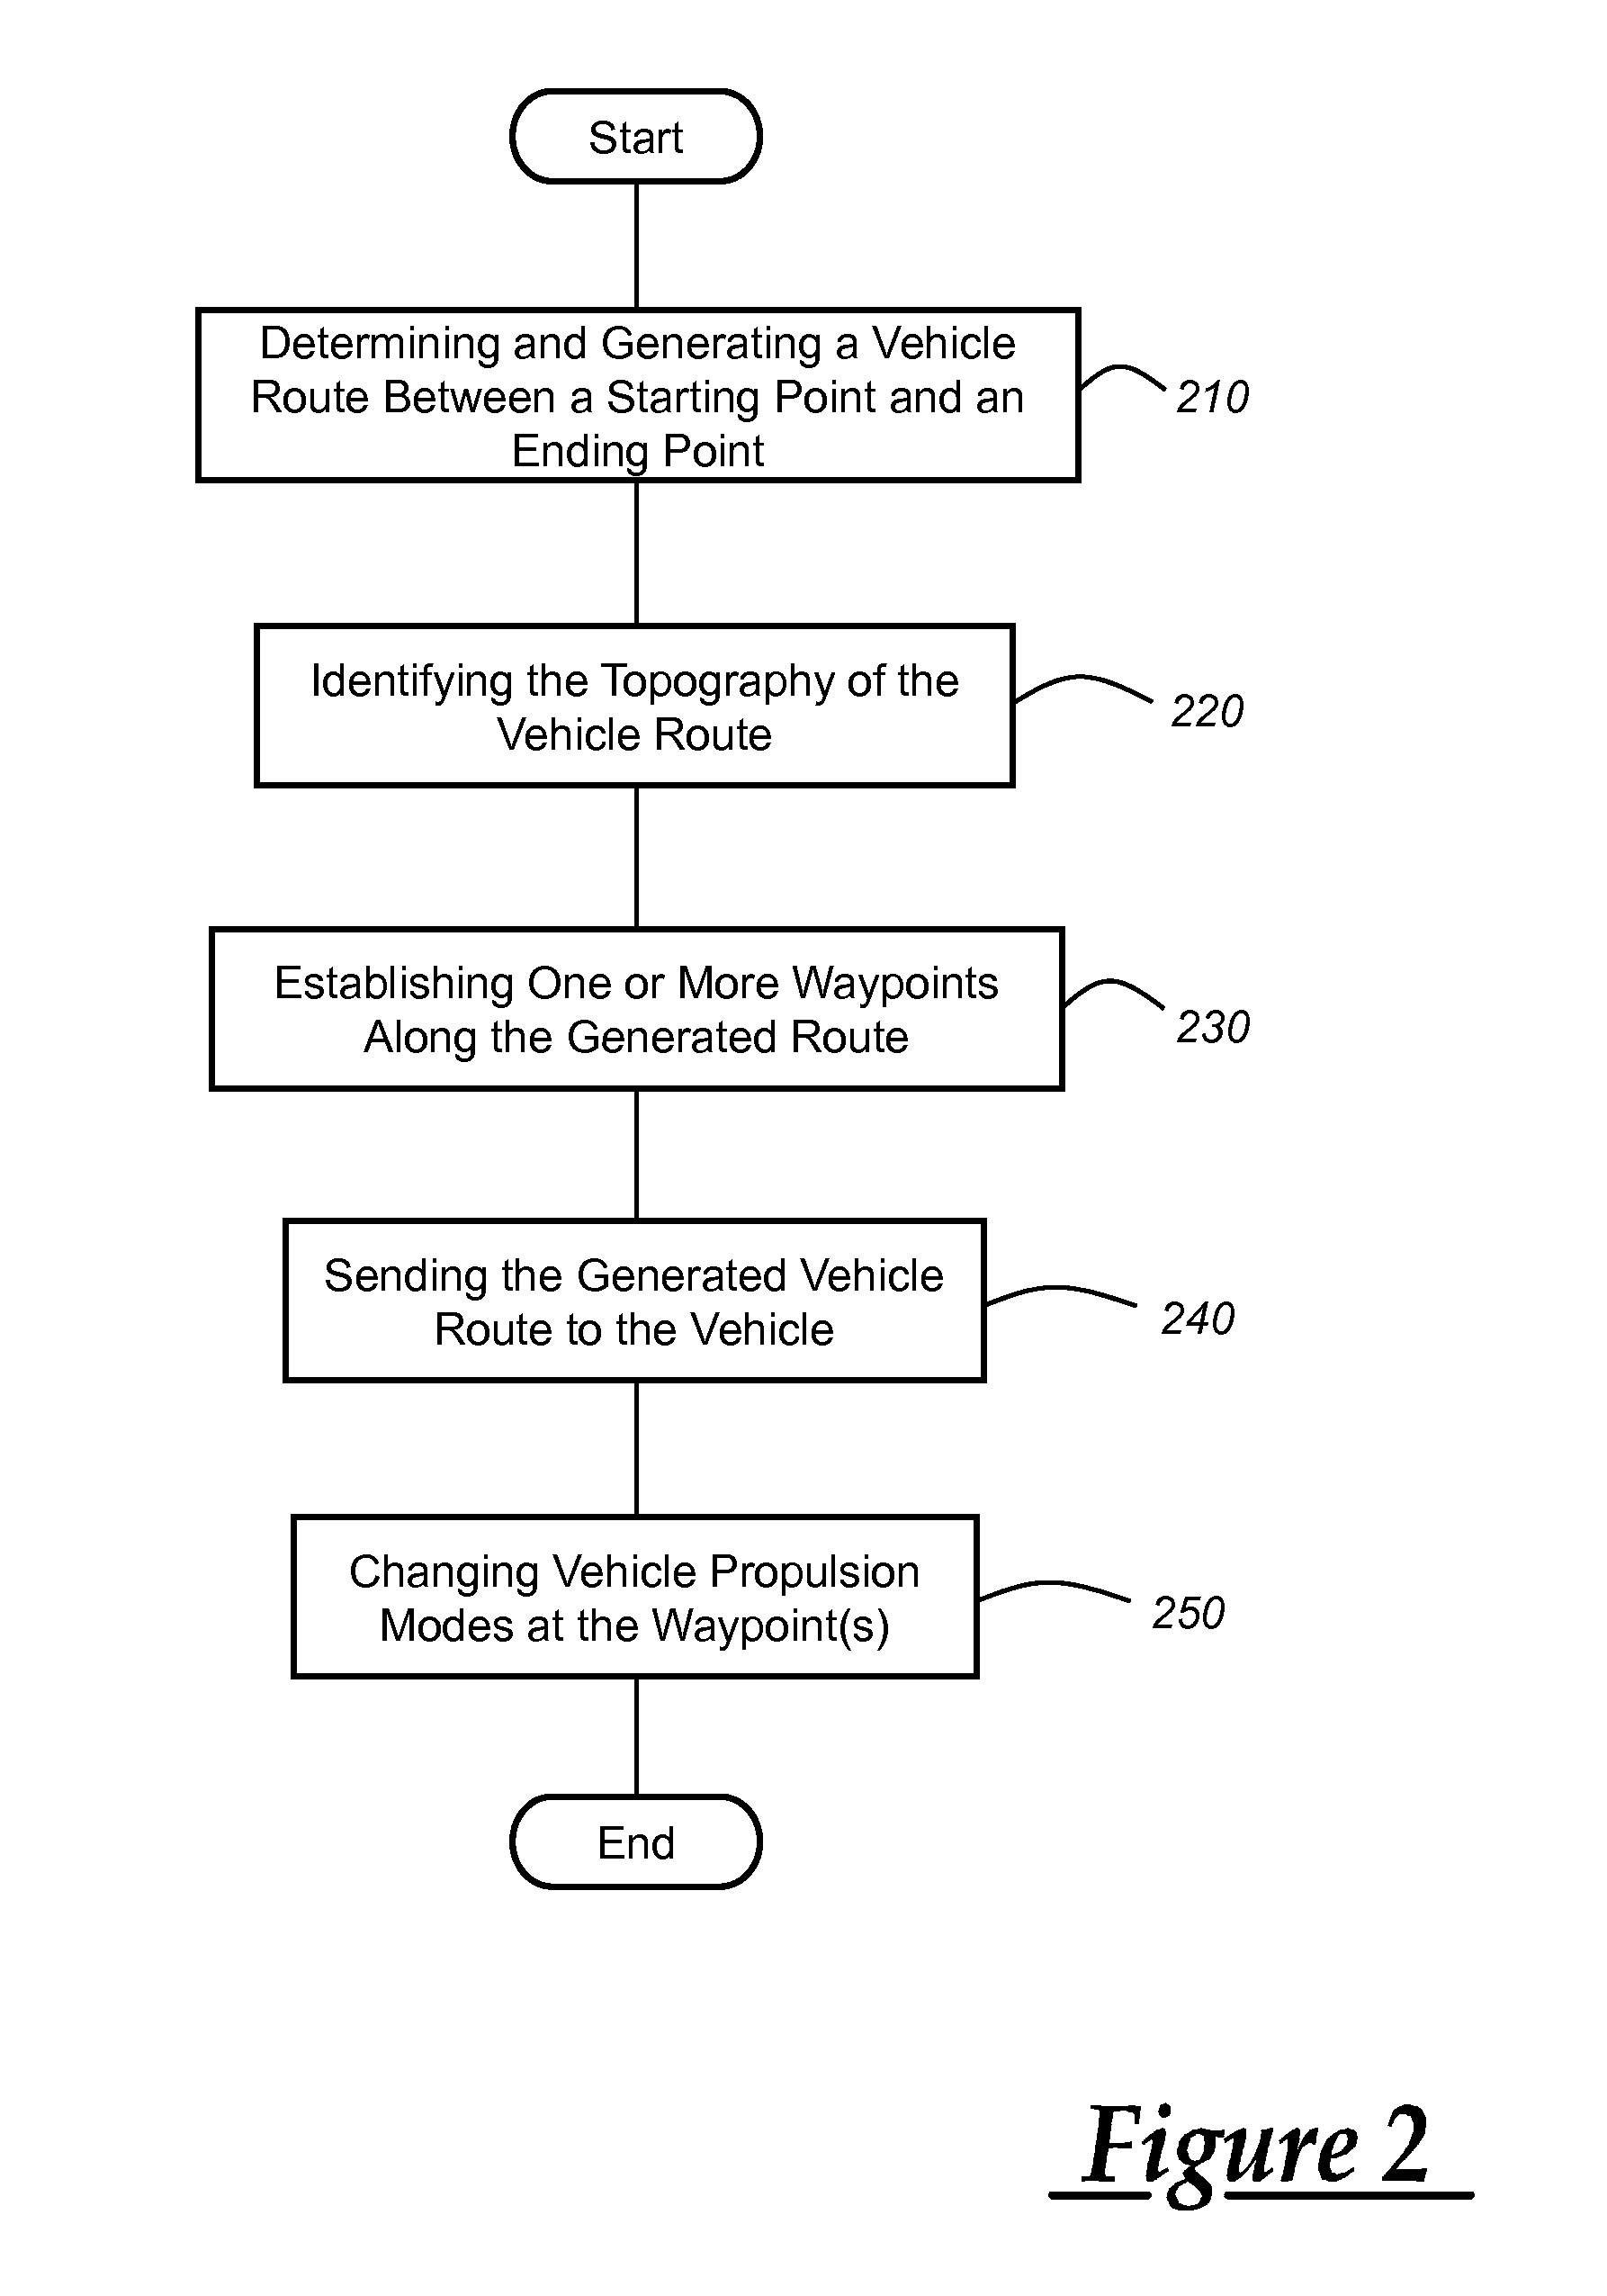 Route-based propulsion mode control for multimodal vehicles